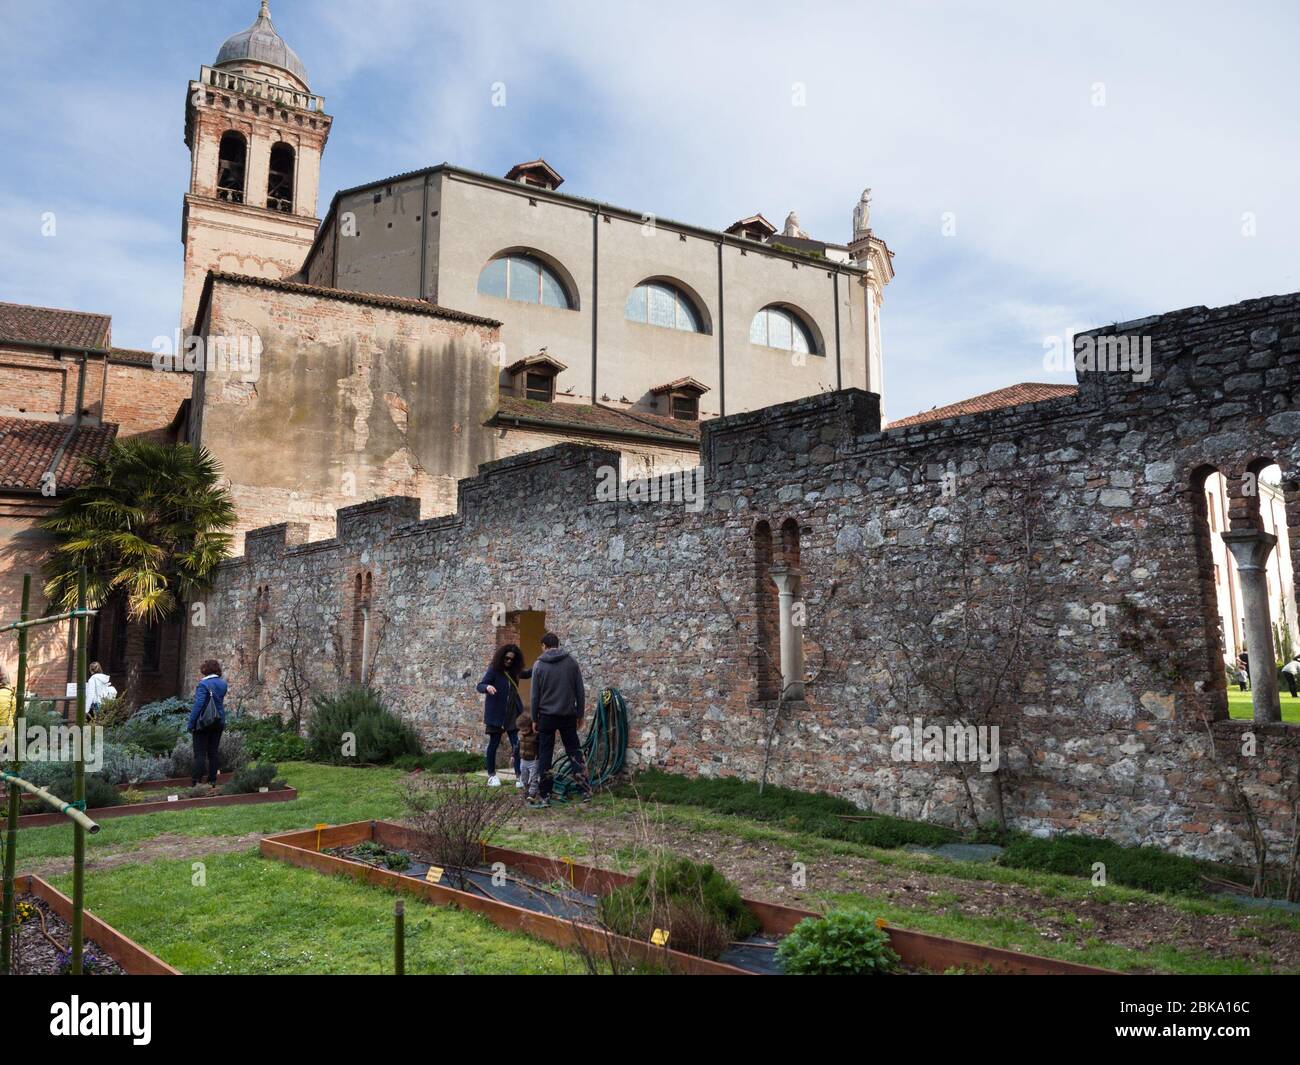 Padua, Italy - April 2, 2018: The botanical garden of the abbey of Santa Maria delle Carceri in the province of Padua founded around the year 1000. Stock Photo